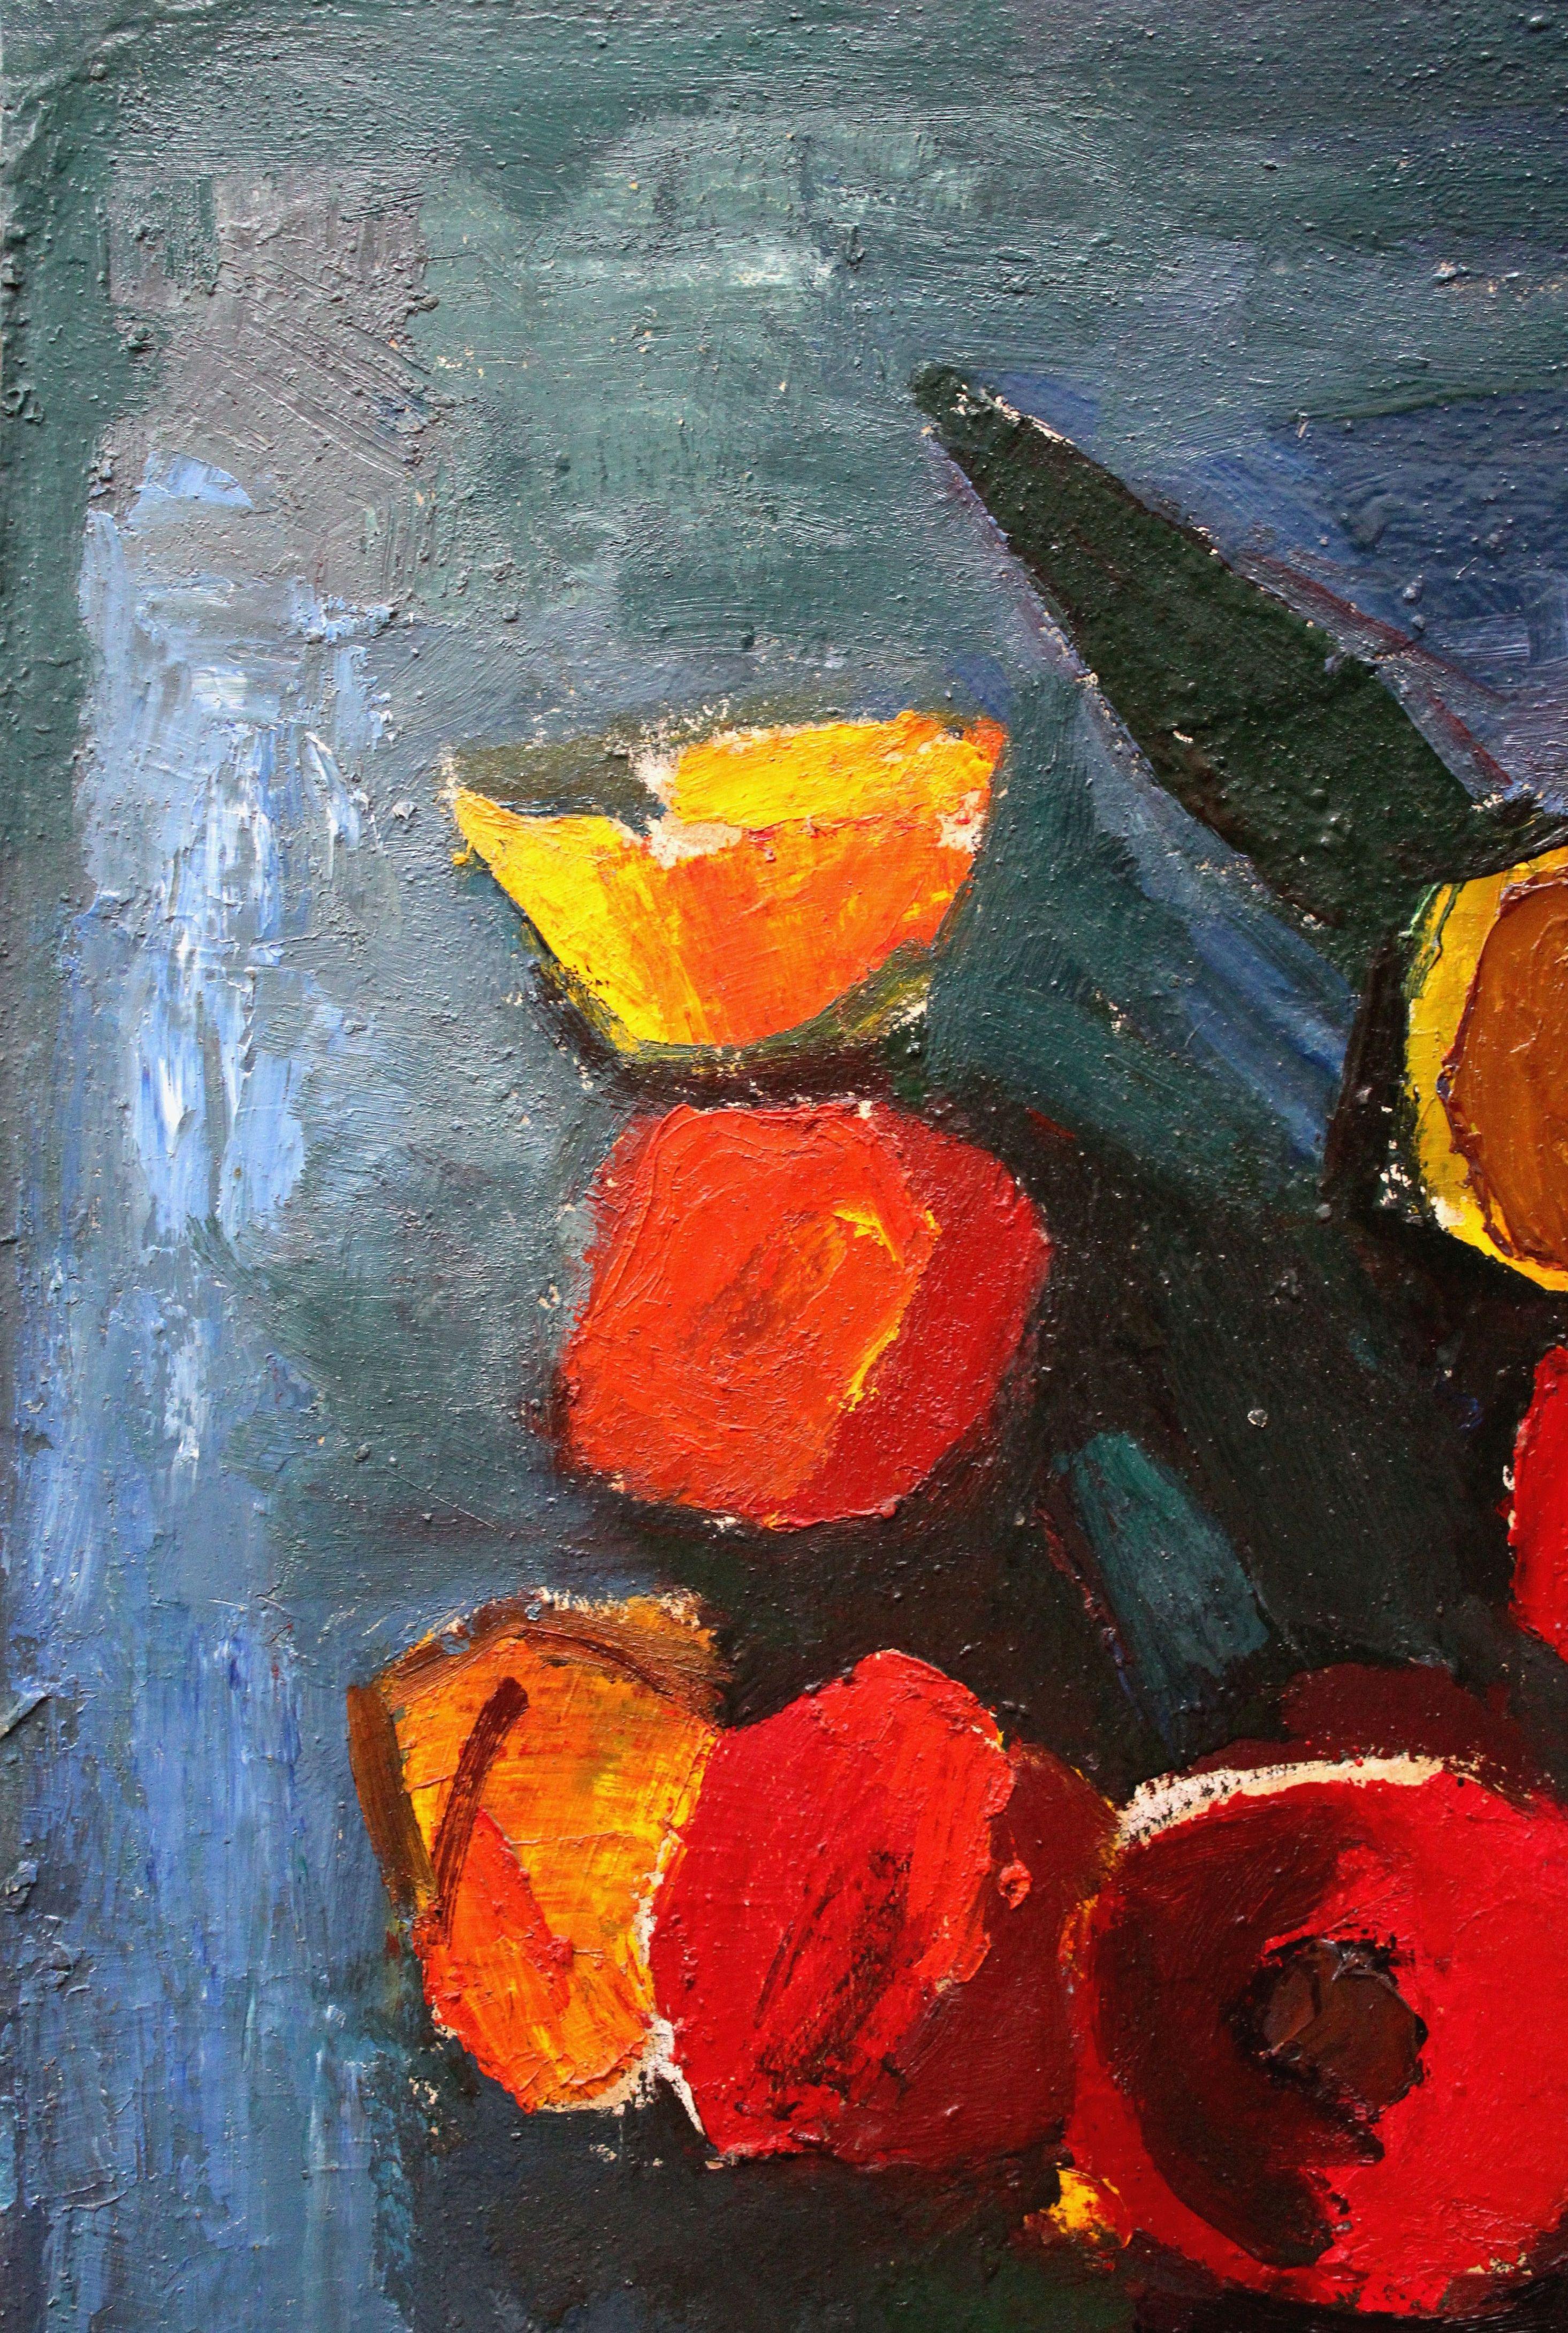 Flowers. Oil on cardboard, 71.5x56 cm - Expressionist Painting by Aleksandr Rodin